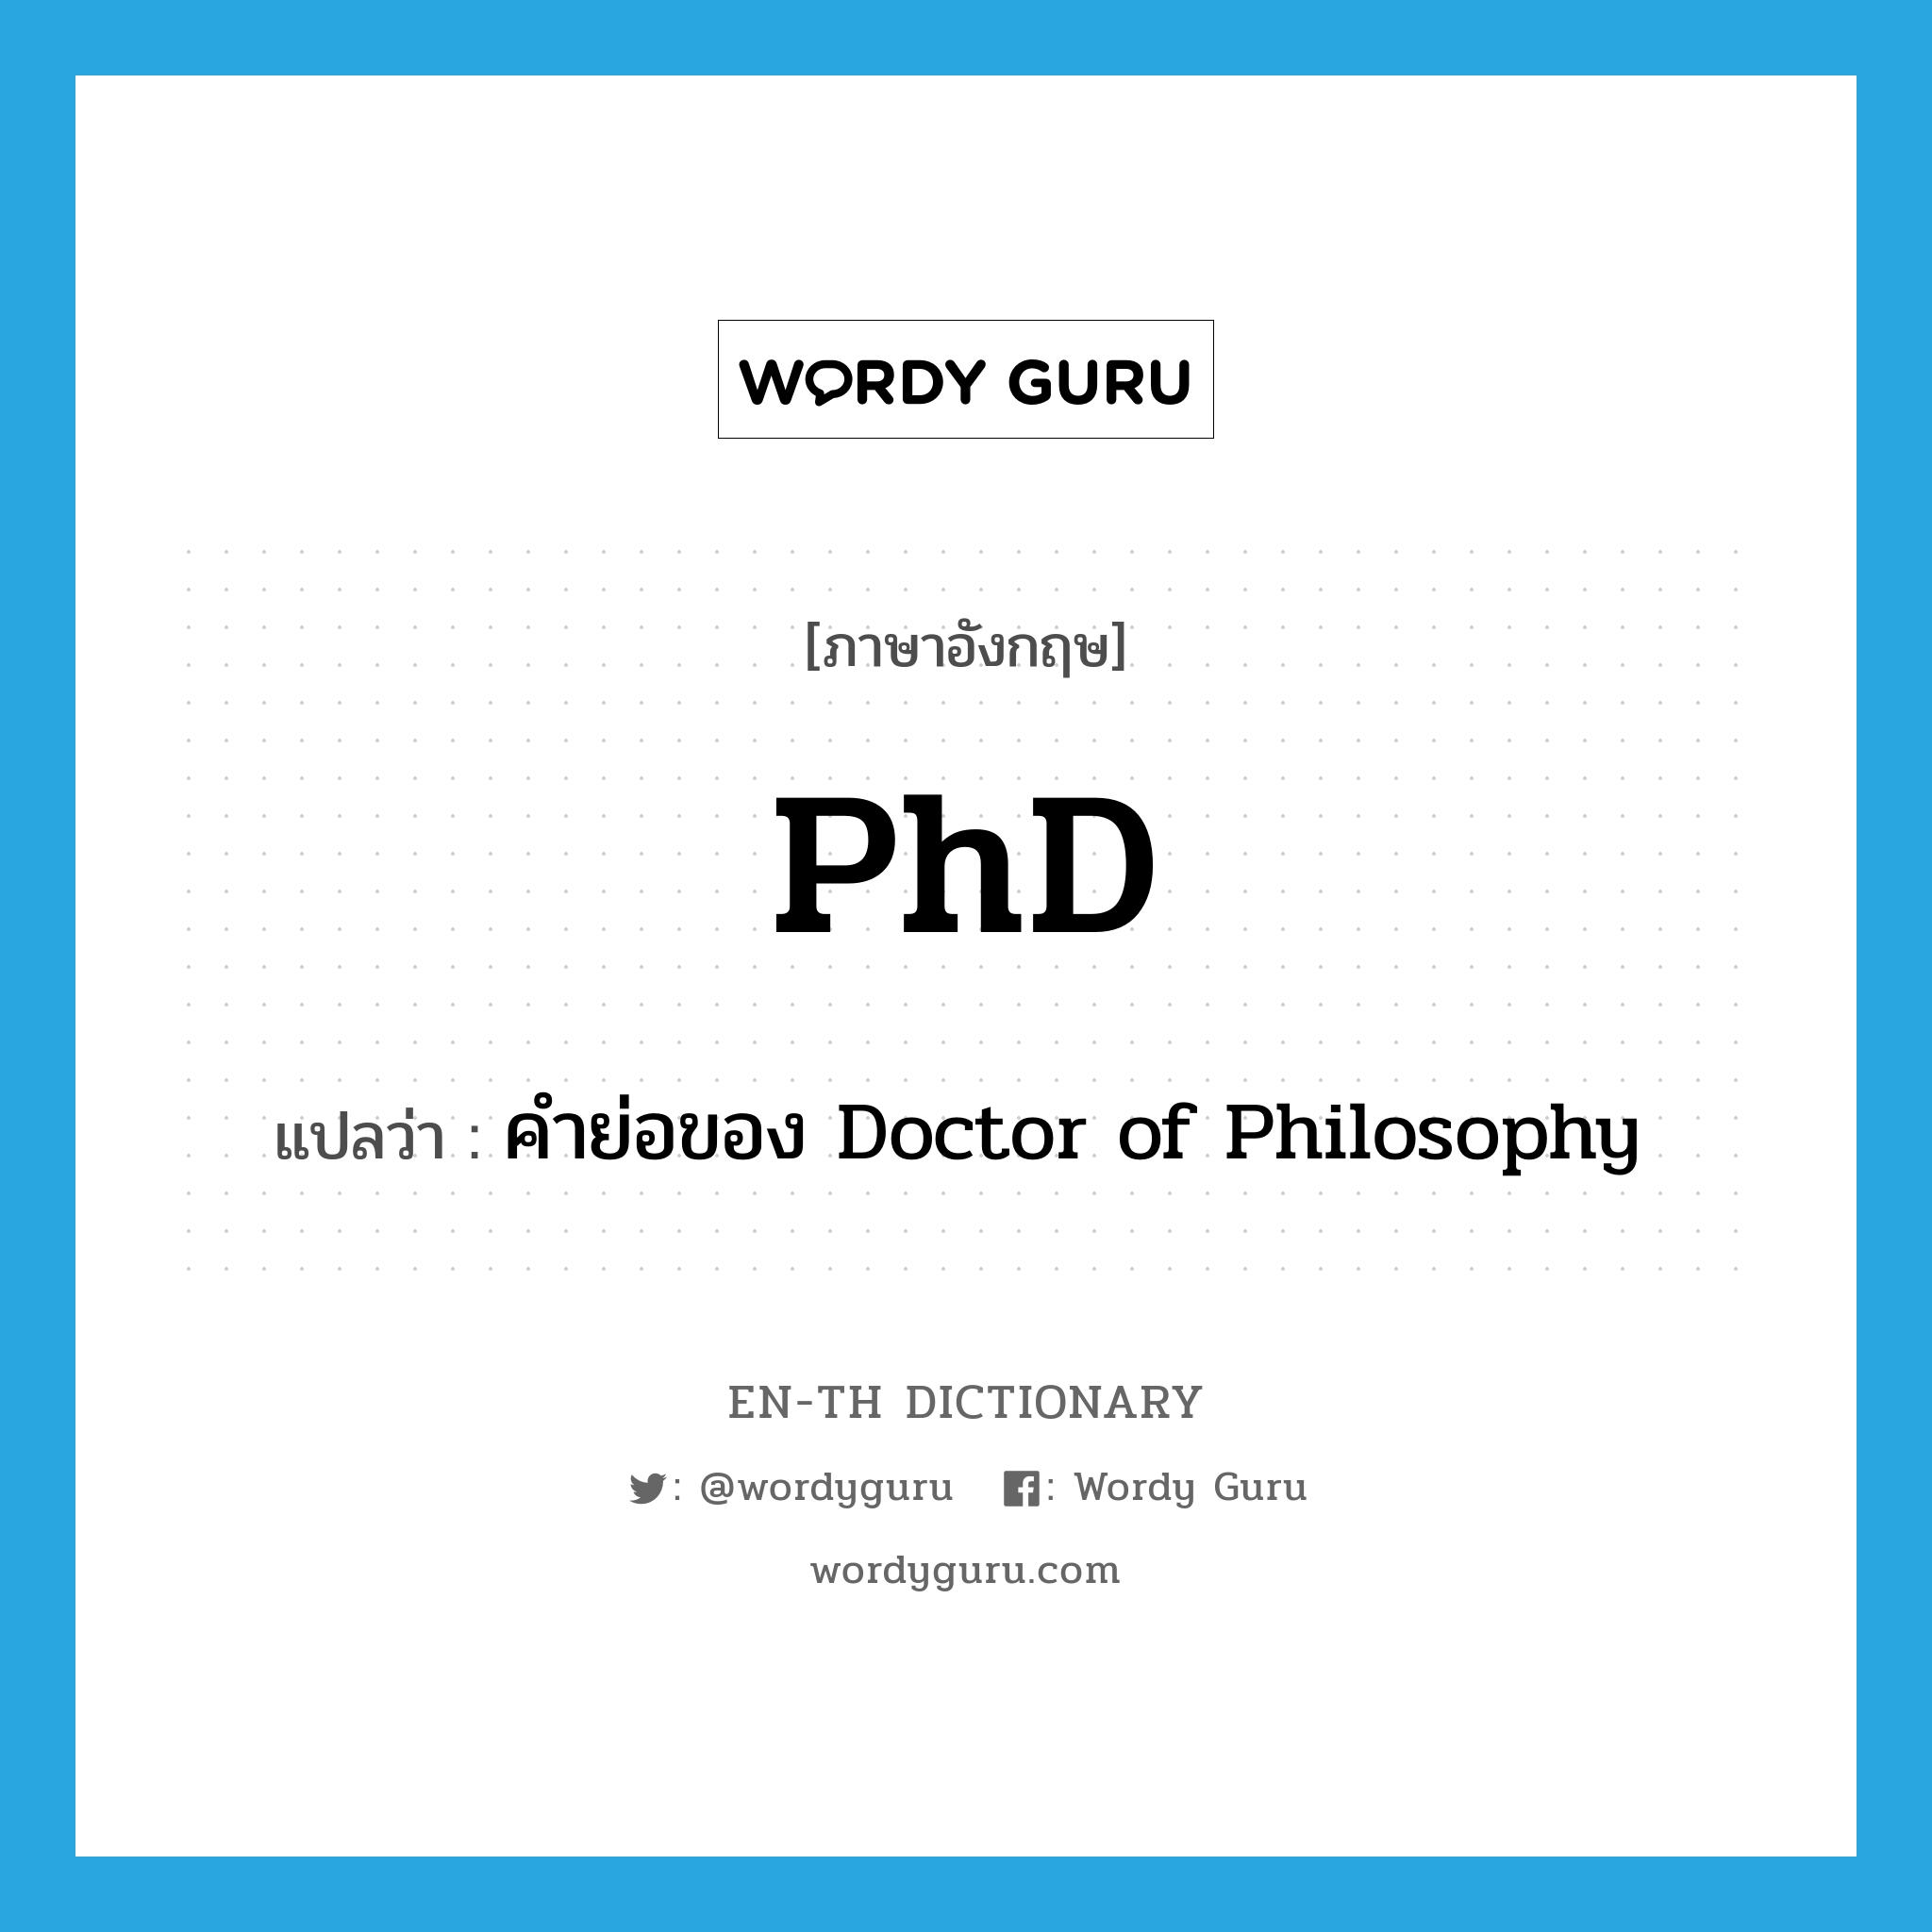 phd in the dictionary